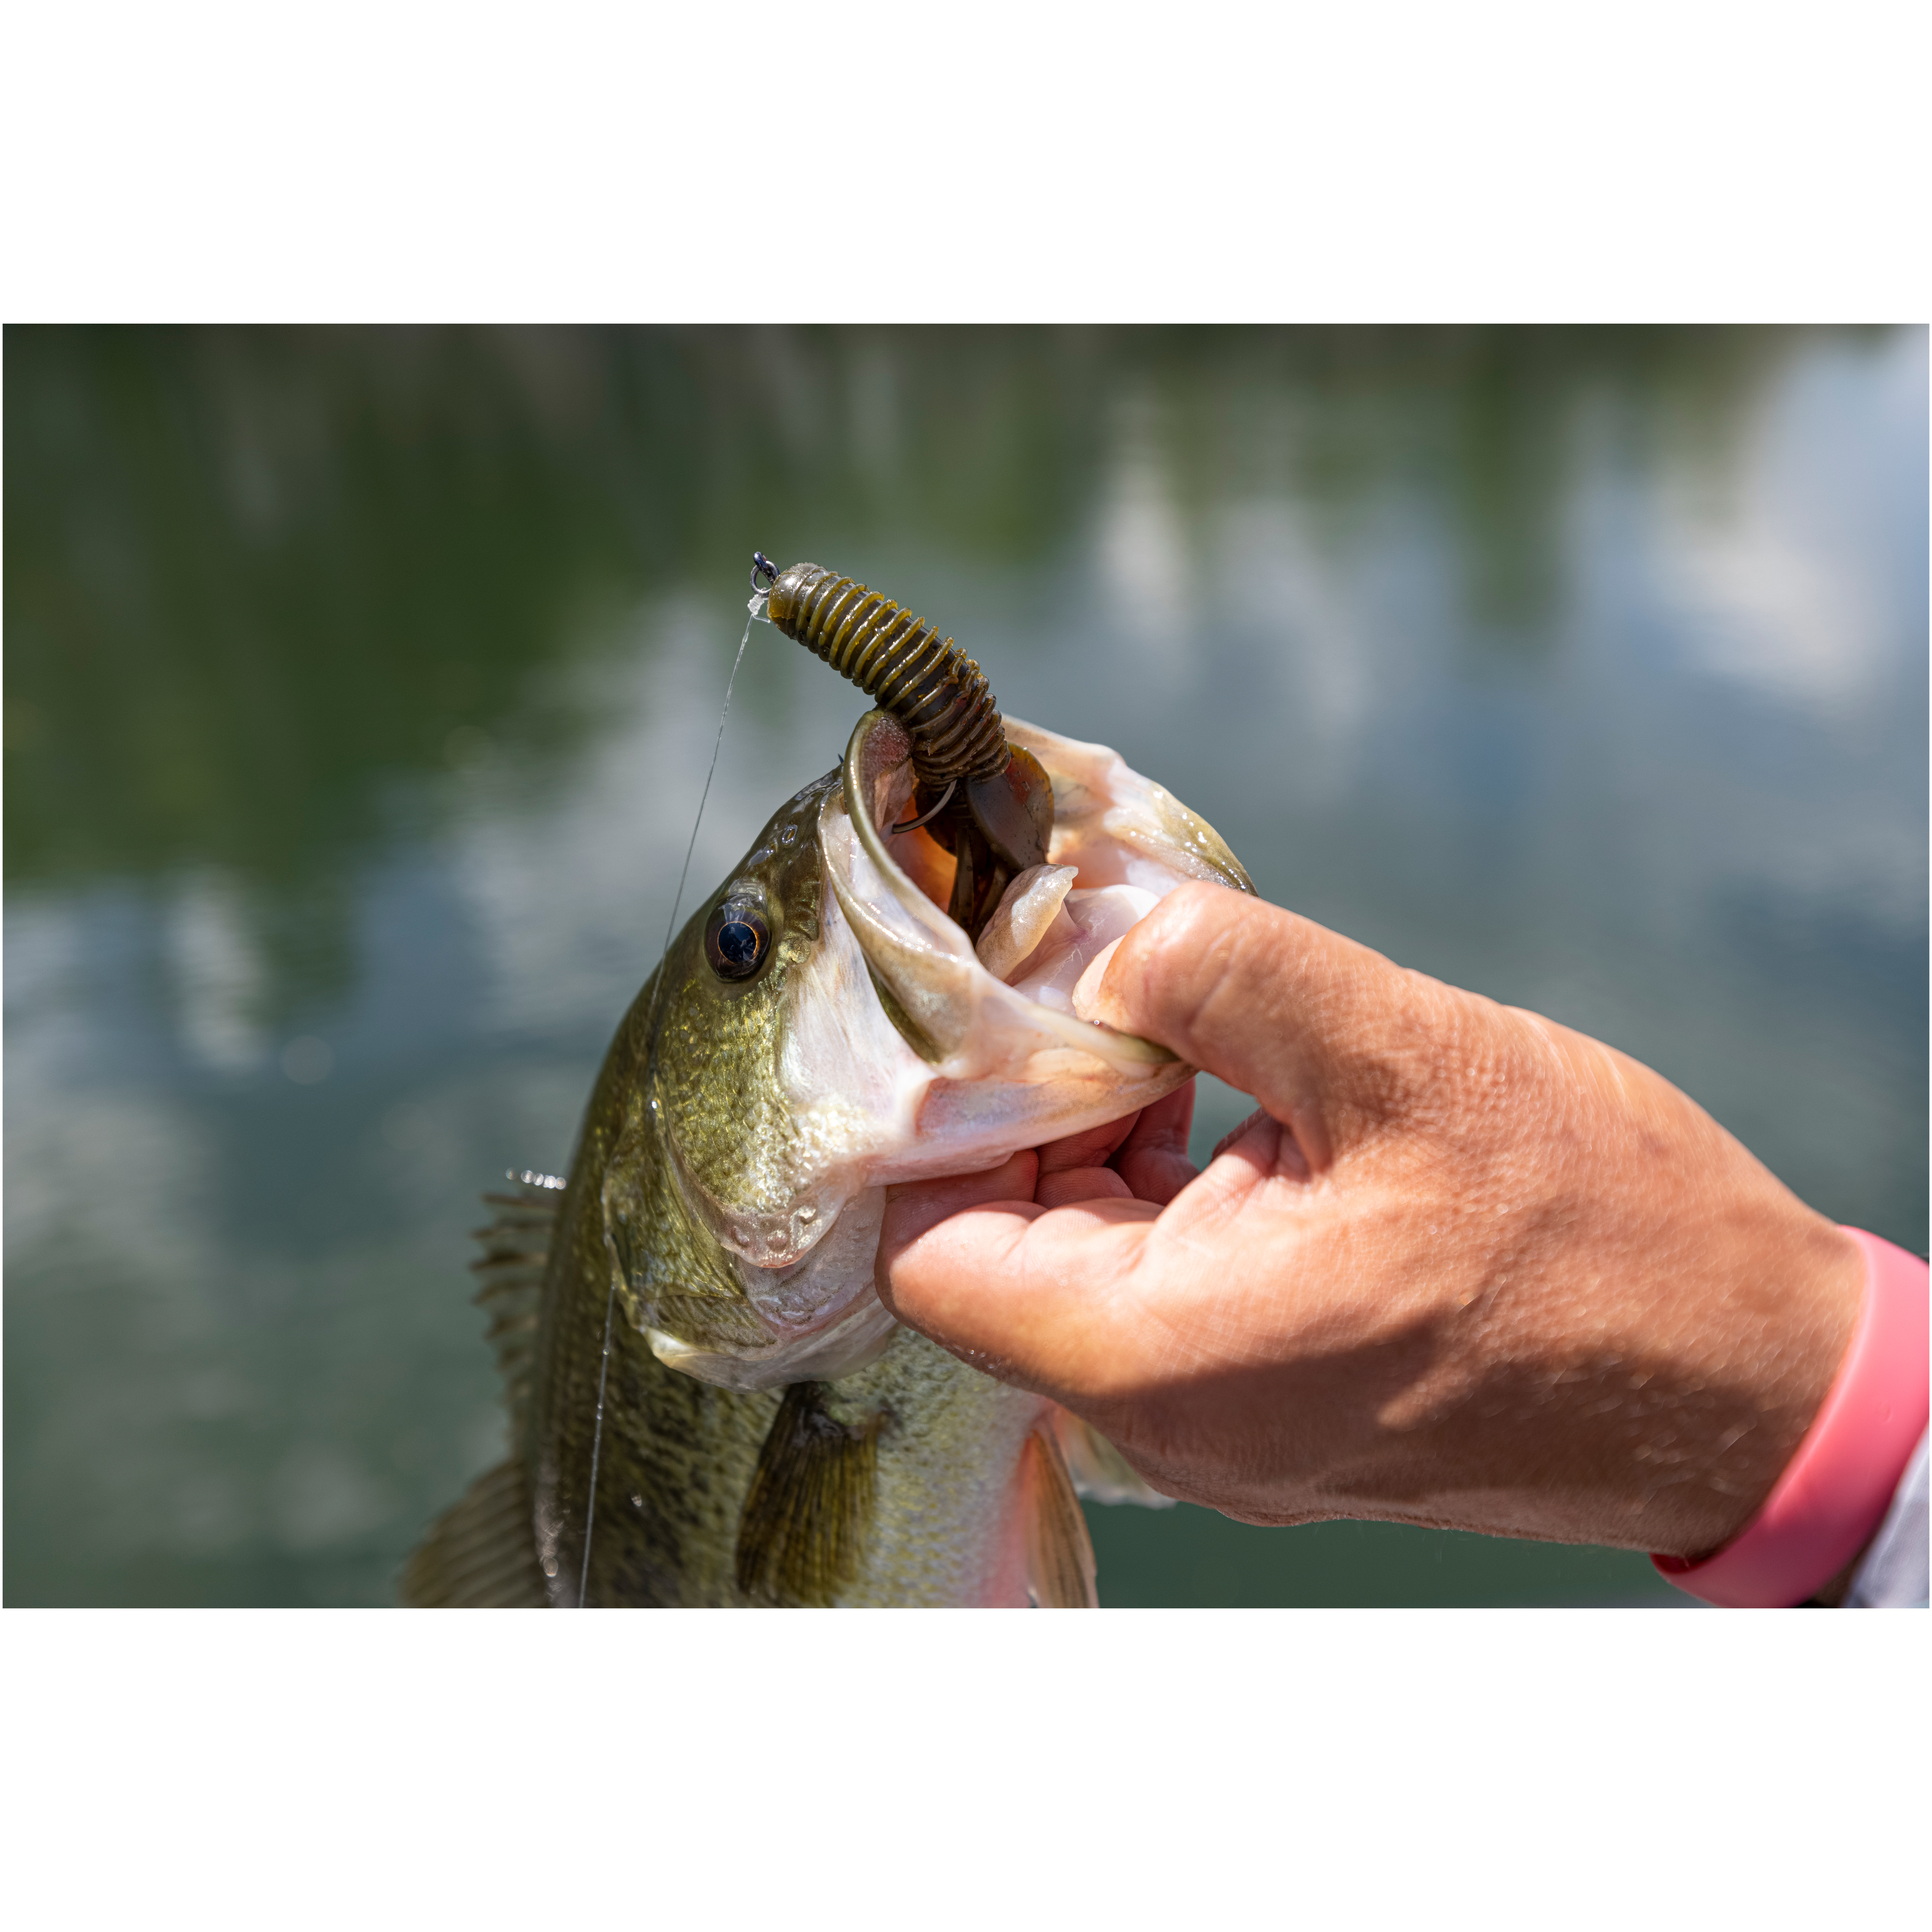 Bass Fishing With a Texas Rig Worm that Cost $0.25 - Budget